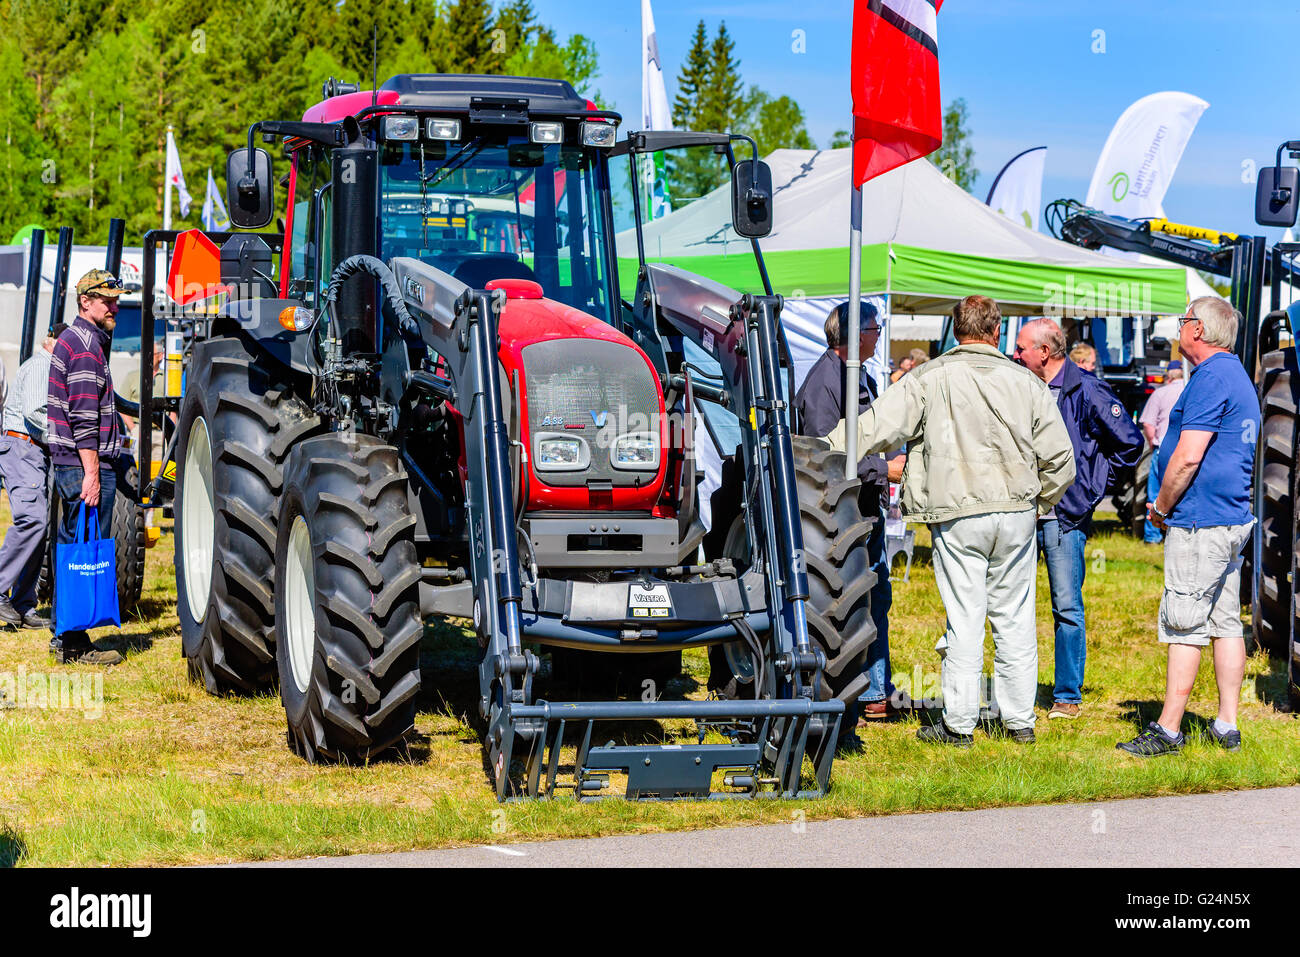 Emmaboda, Sweden - May 13, 2016: Forest and tractor (Skog och traktor) fair. Visitors looking at a red Valtra A83 tractor. Stock Photo